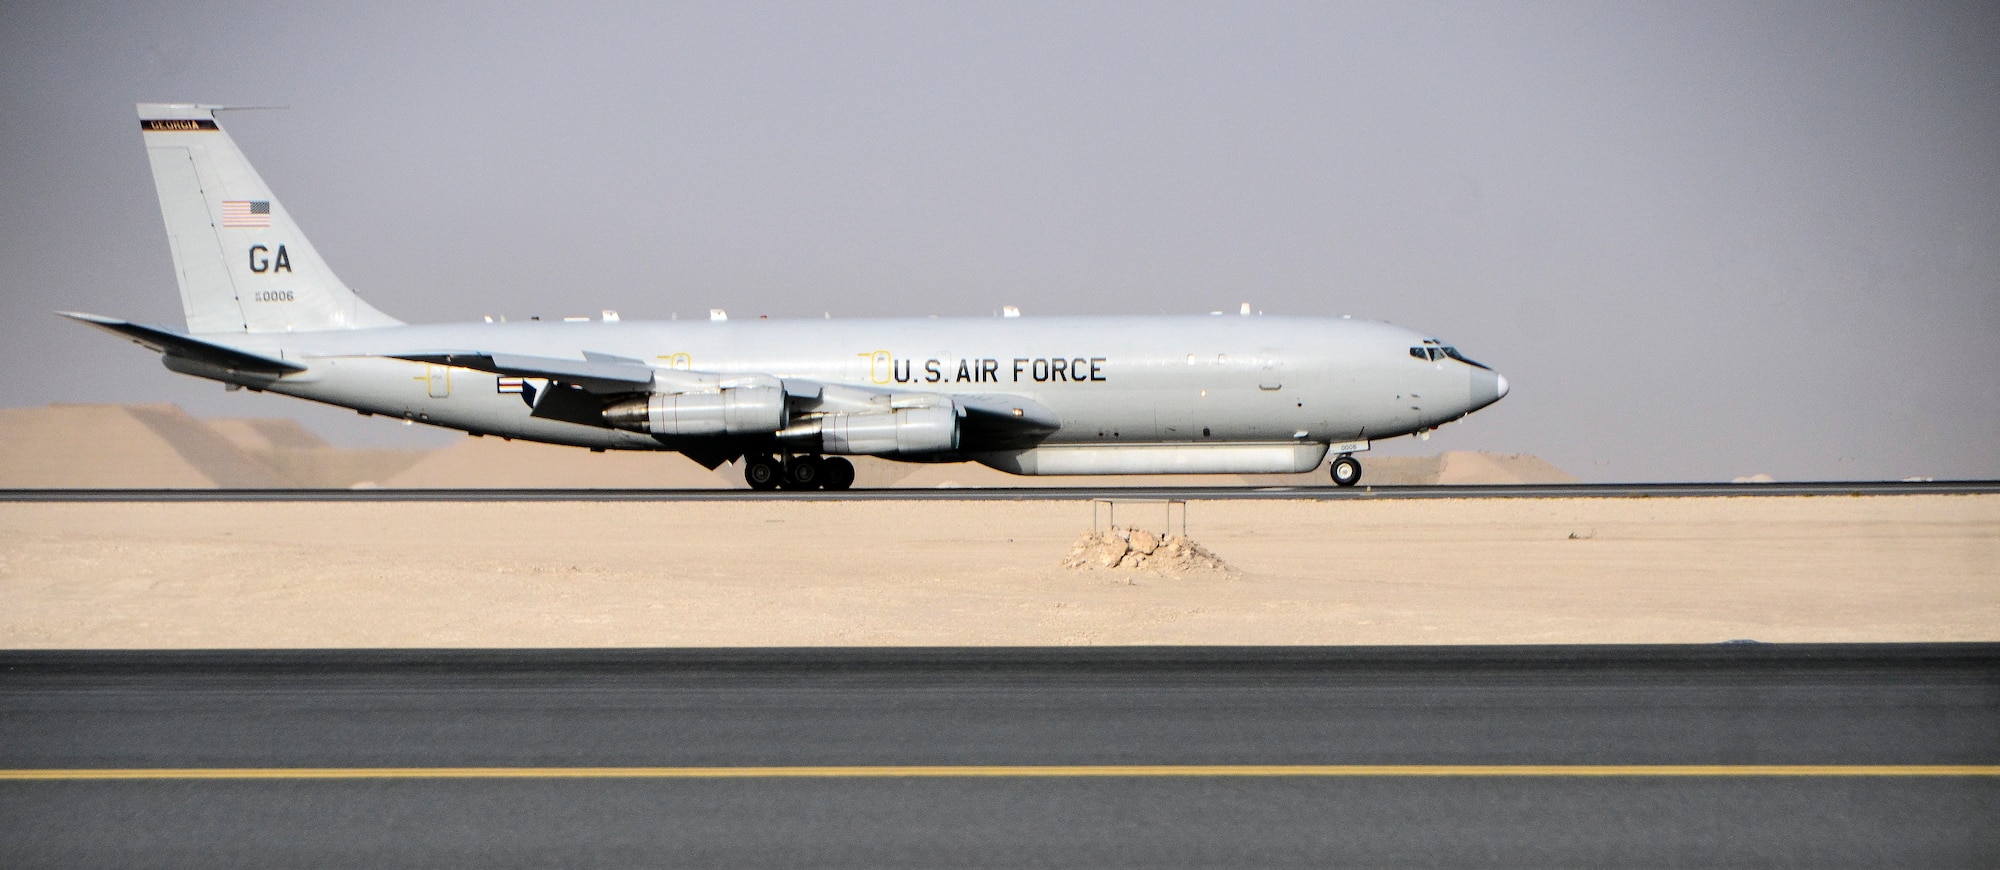 An E-8C Joint Surveillance Target Attack Radar System lands at Al Udeid Air Base, Qatar, May 1, 2014, after reaching a milestone of 100,000 flying hours to include more than 88,000 hours in the U.S. Central Command area of responsibility since 2001. The JSTARS mission is to provide ground commanders with intelligence, surveillance and reconnaissance air power to boost force protection, defensive operations, over-watch and combat search and rescue missions throughout the AOR.  (U.S. Air Force photo/Senior Airman Jared Trimarchi)